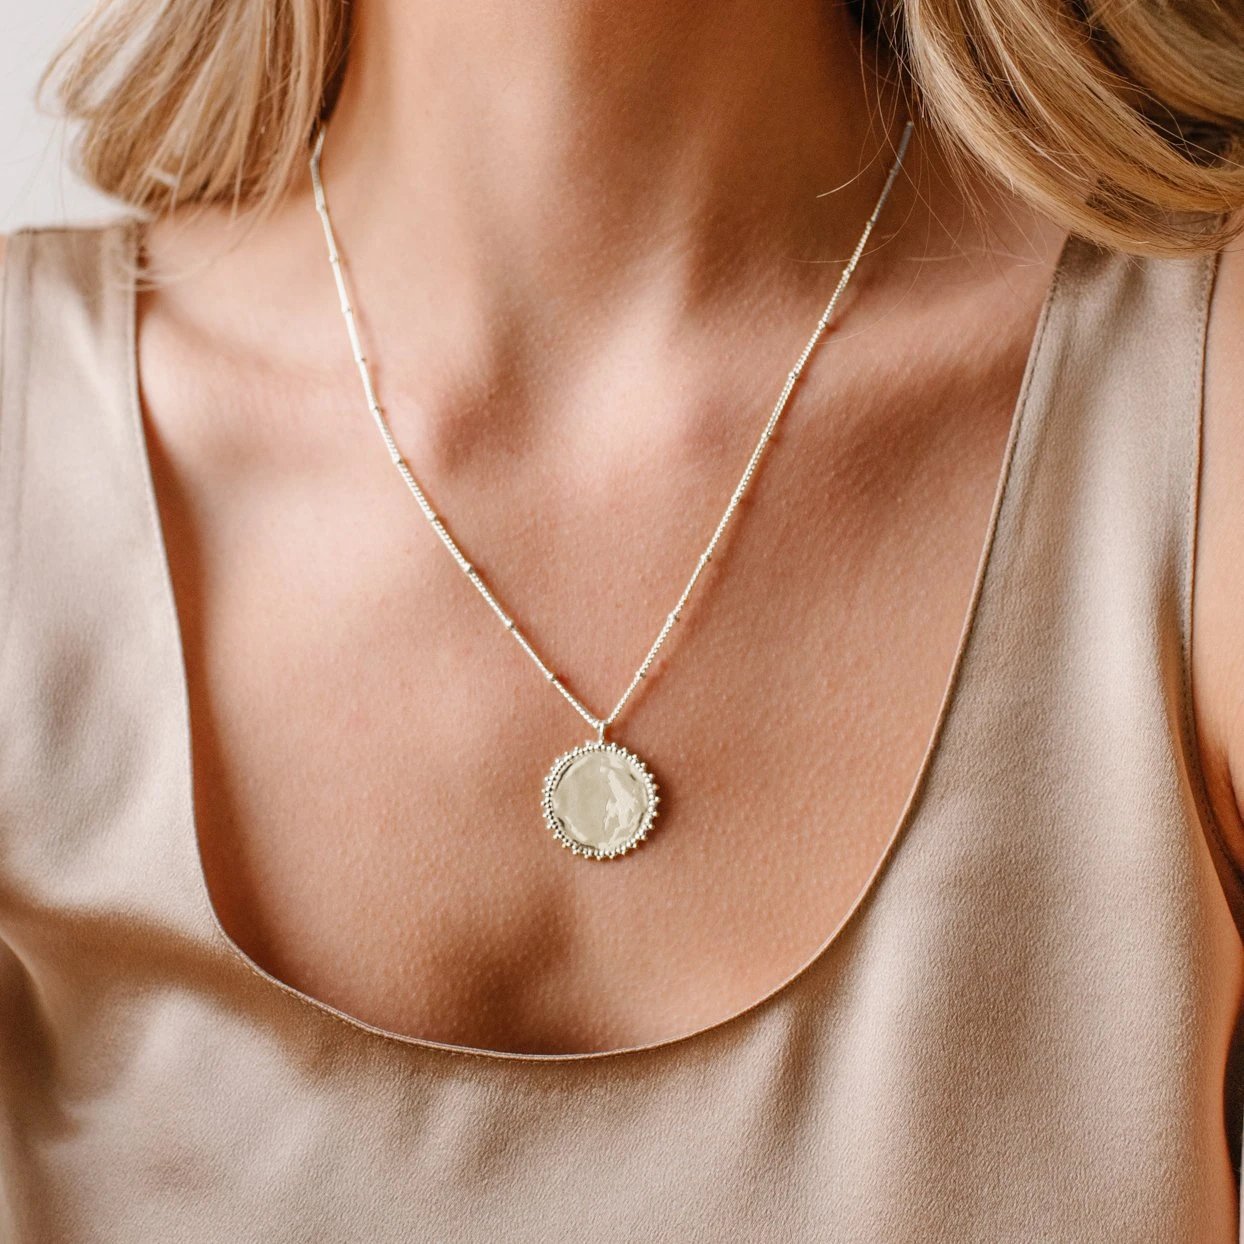 BELIEVE SOLEIL COIN PENDANT NECKLACE - SILVER - SO PRETTY CARA COTTER